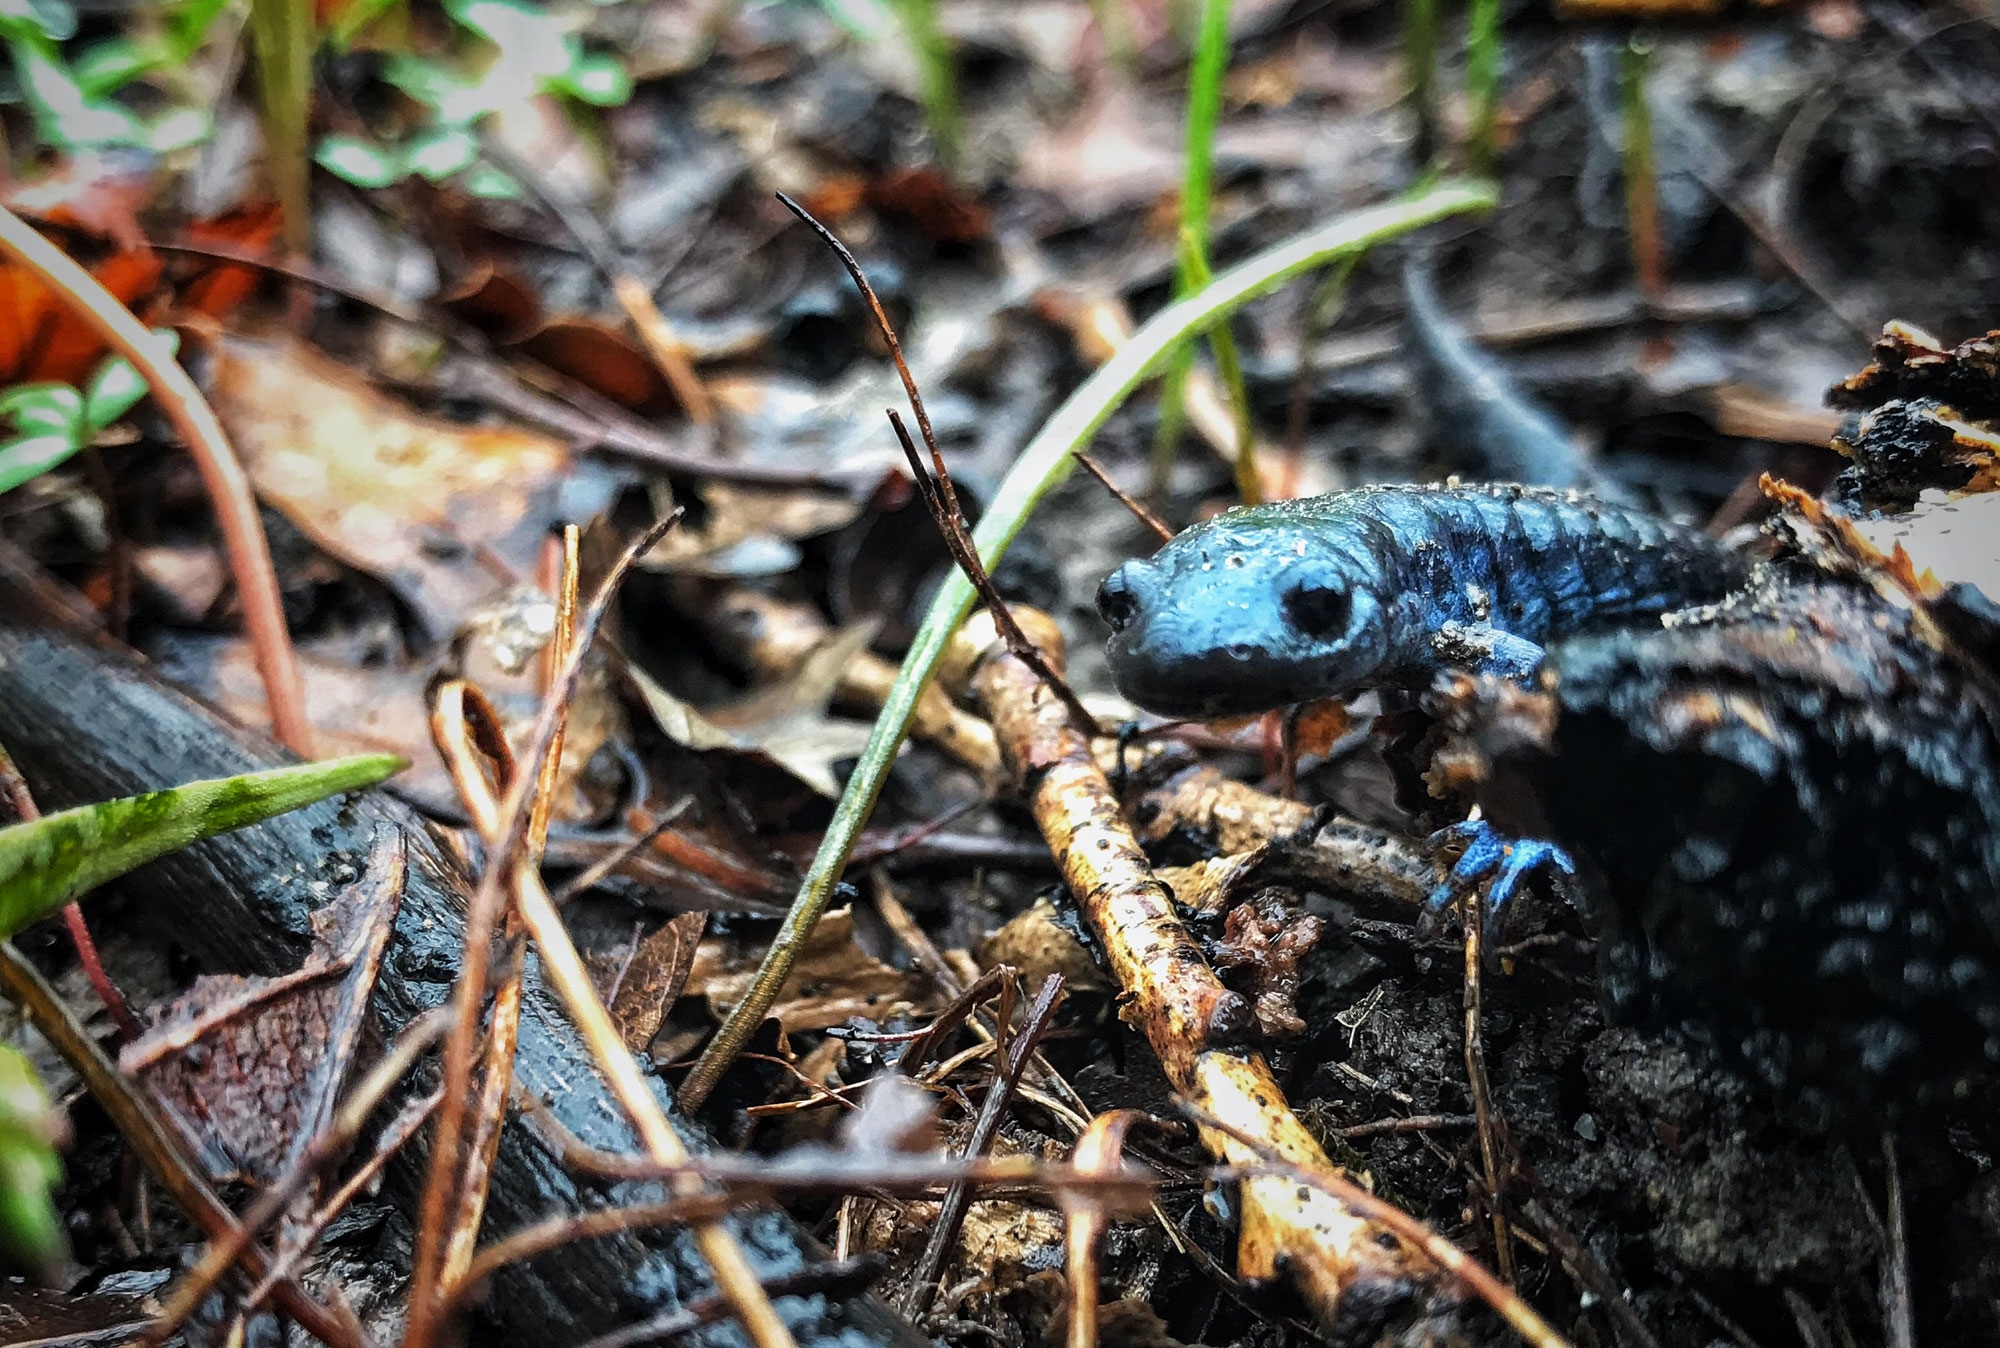 A spotted salamander on the ground.